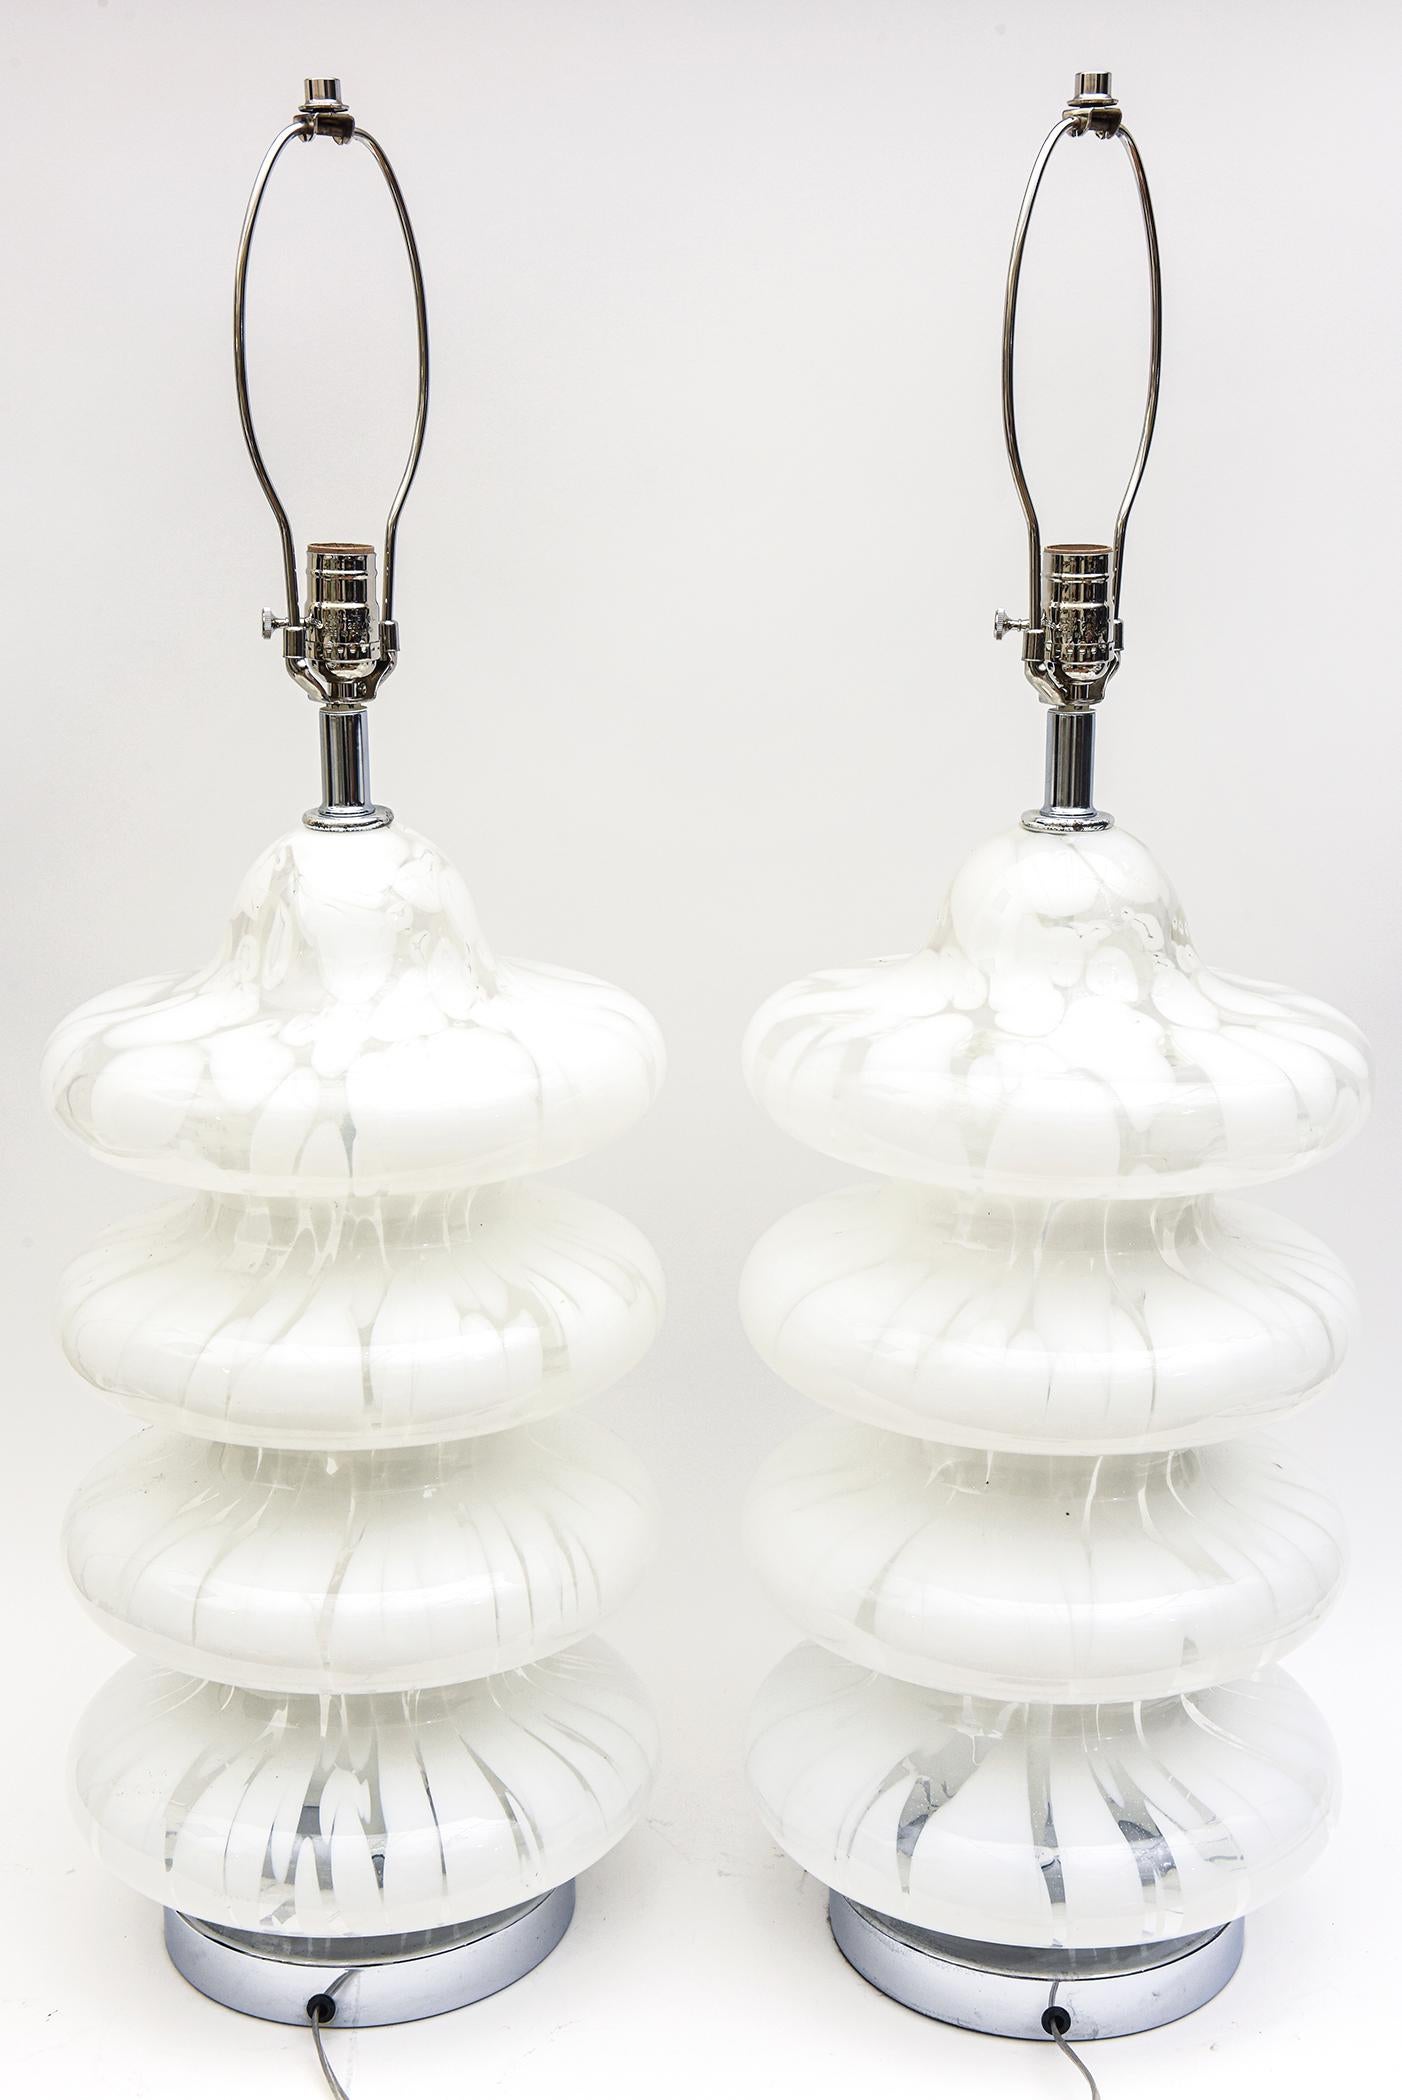 Vintage Carlo Nason for Murano White Tiered Pagoda Glass Lamps Pair Of en vente 2